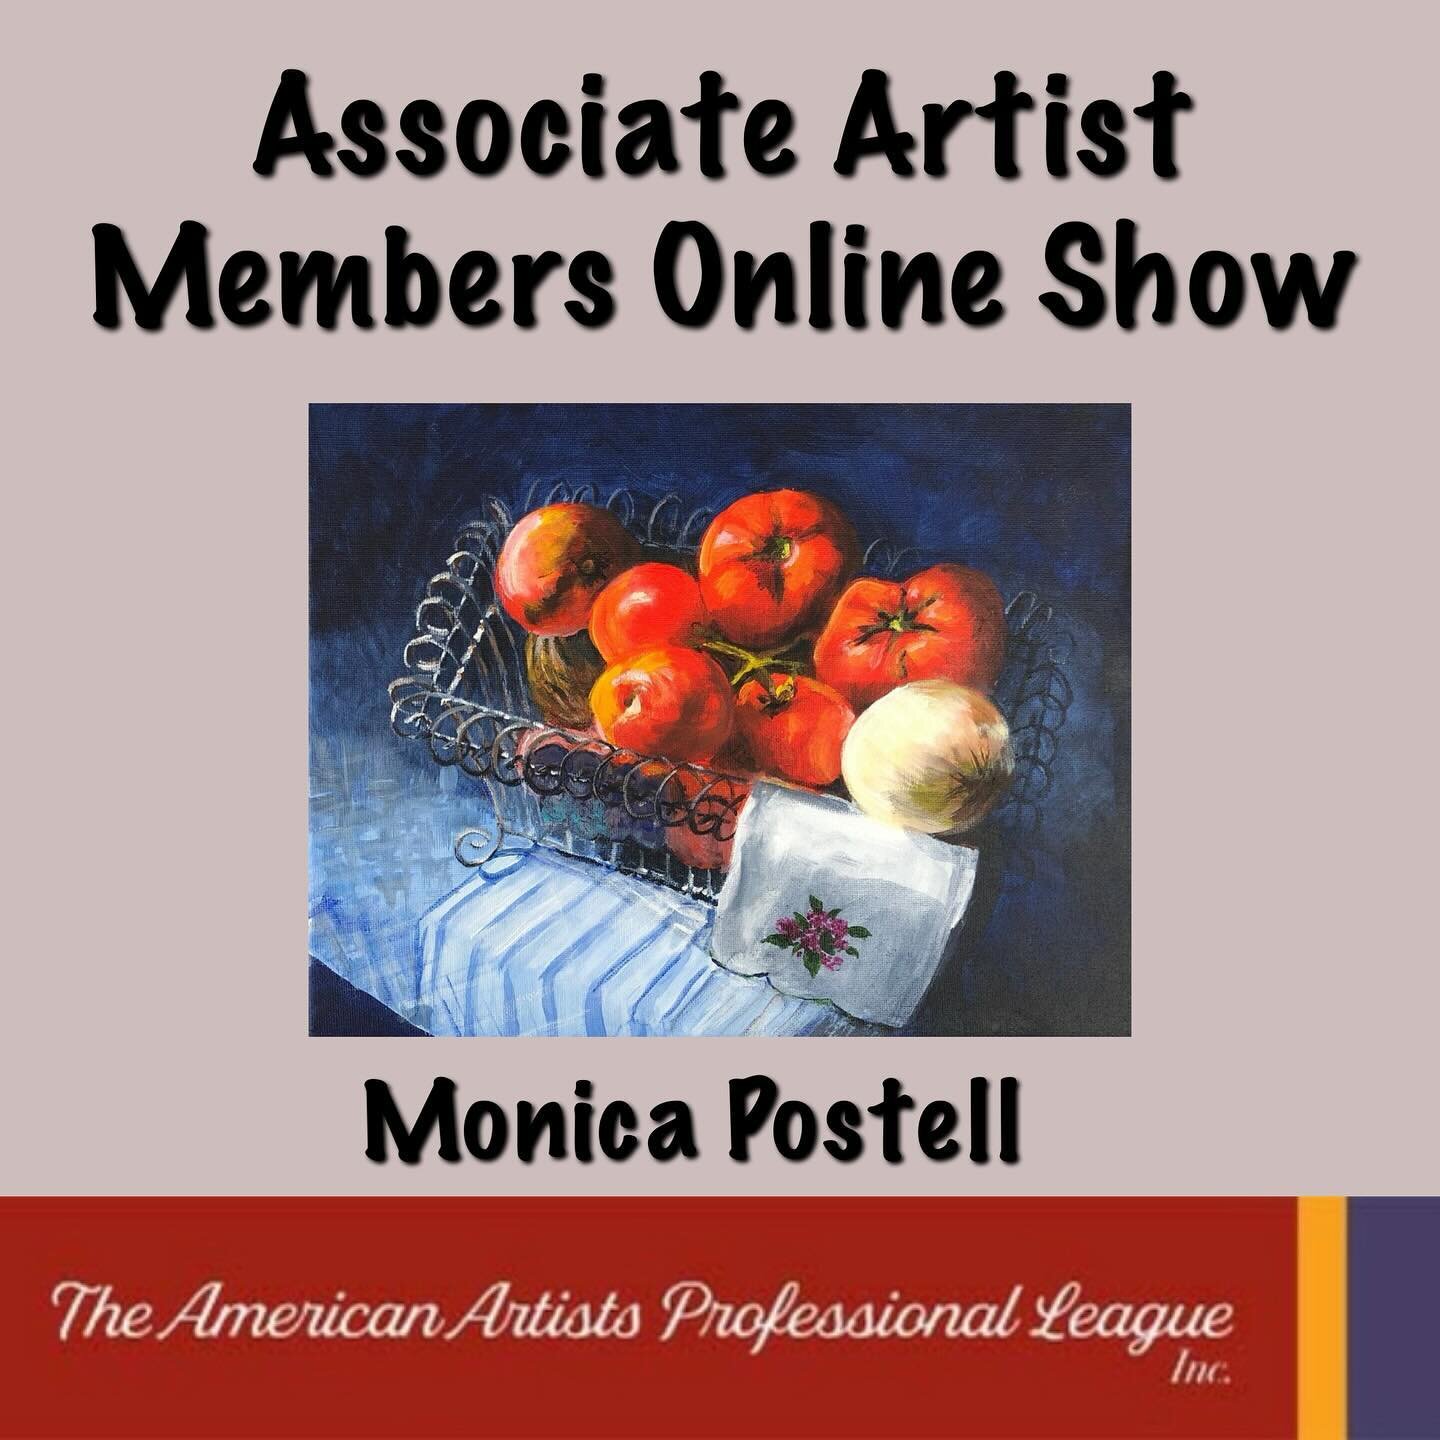 Check out this available work to purchase by Monica Postell, &ldquo;Tomatoes in French Wire&rdquo; as part of our Associate Online Show.  Head to aaplinc.org or click the link in our bio for more information and to purchase this amazing painting toda